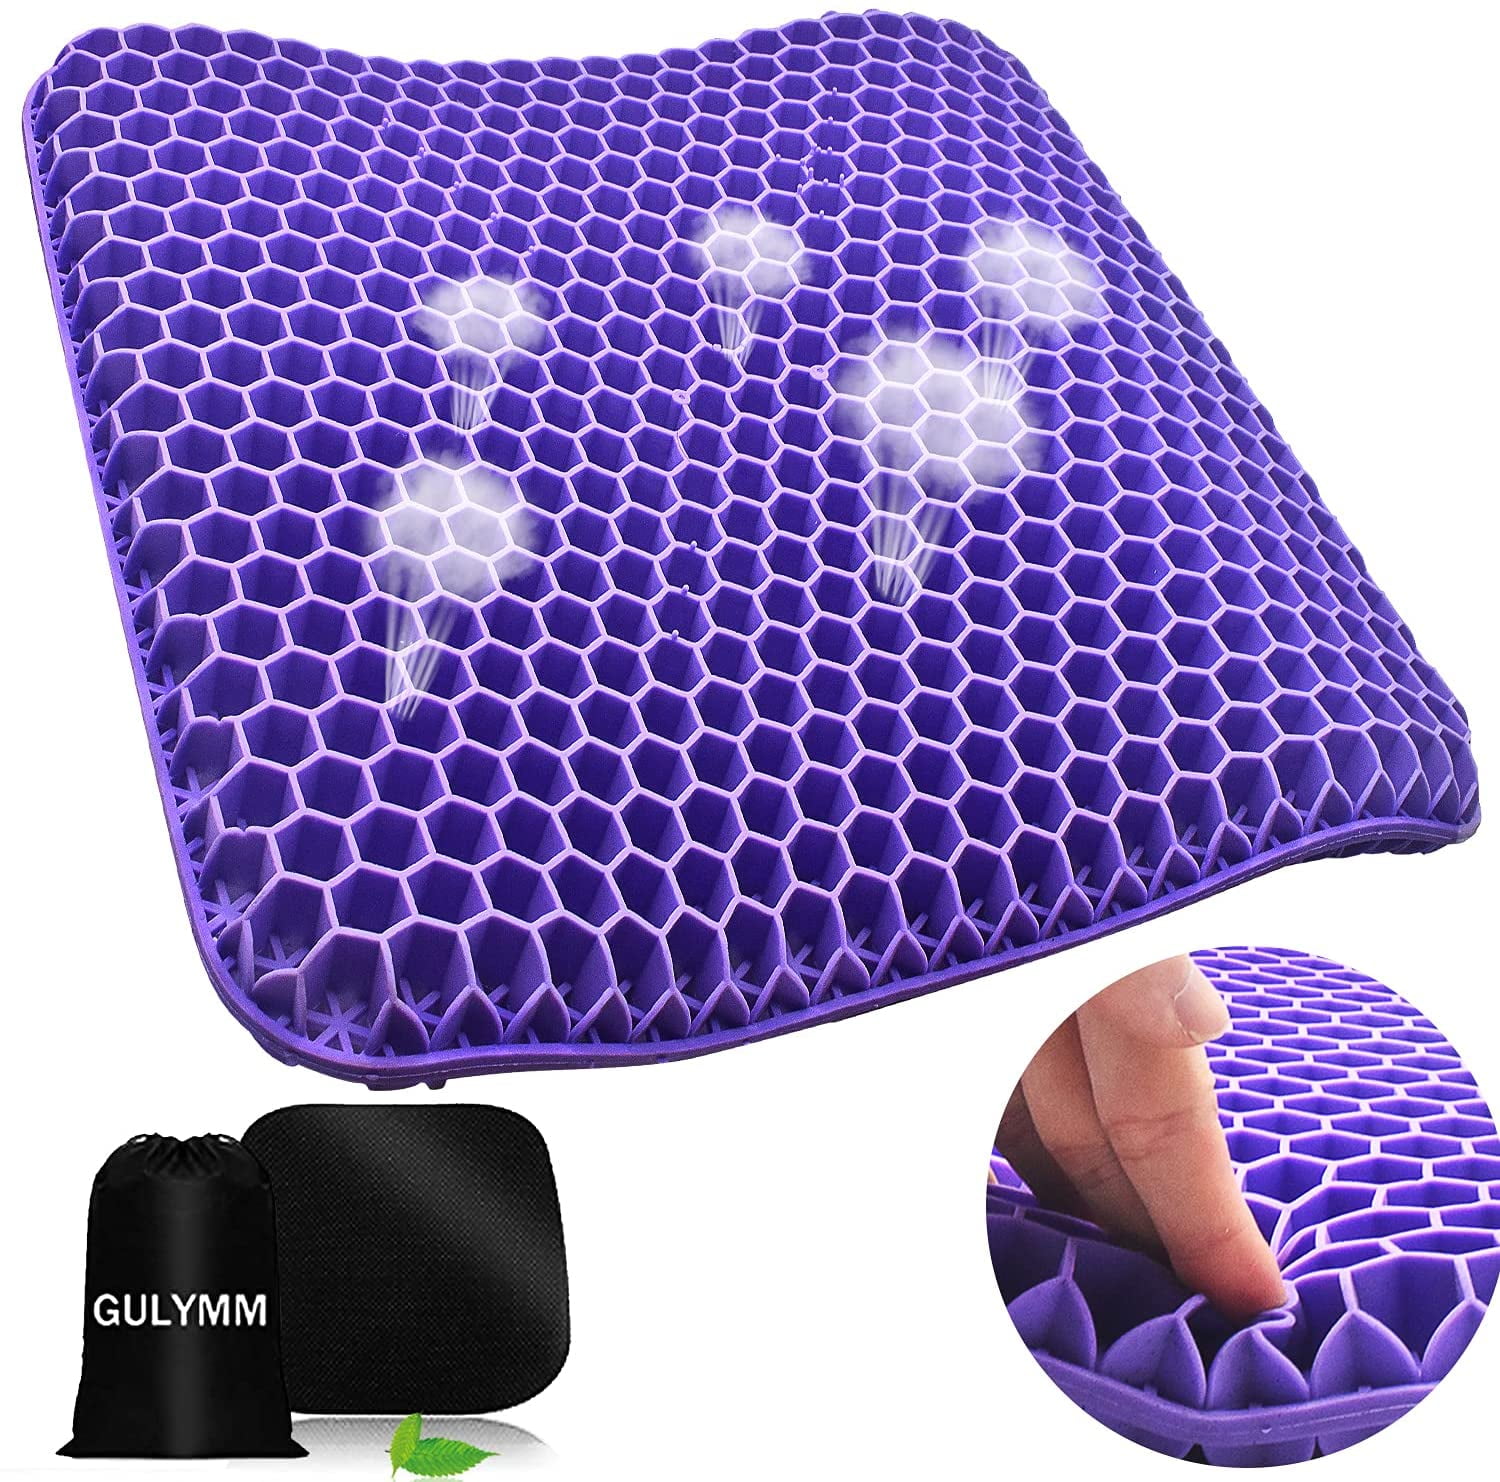  ENDYWU Gel Seat Cushion for Long Sitting Double Thick Large  Seat Cushion for Office Chair Cushion with Non-Slip Cover Pressure Relief Seat  Cushion for Hip Tailbone Back Sciatica Car Wheelchair 